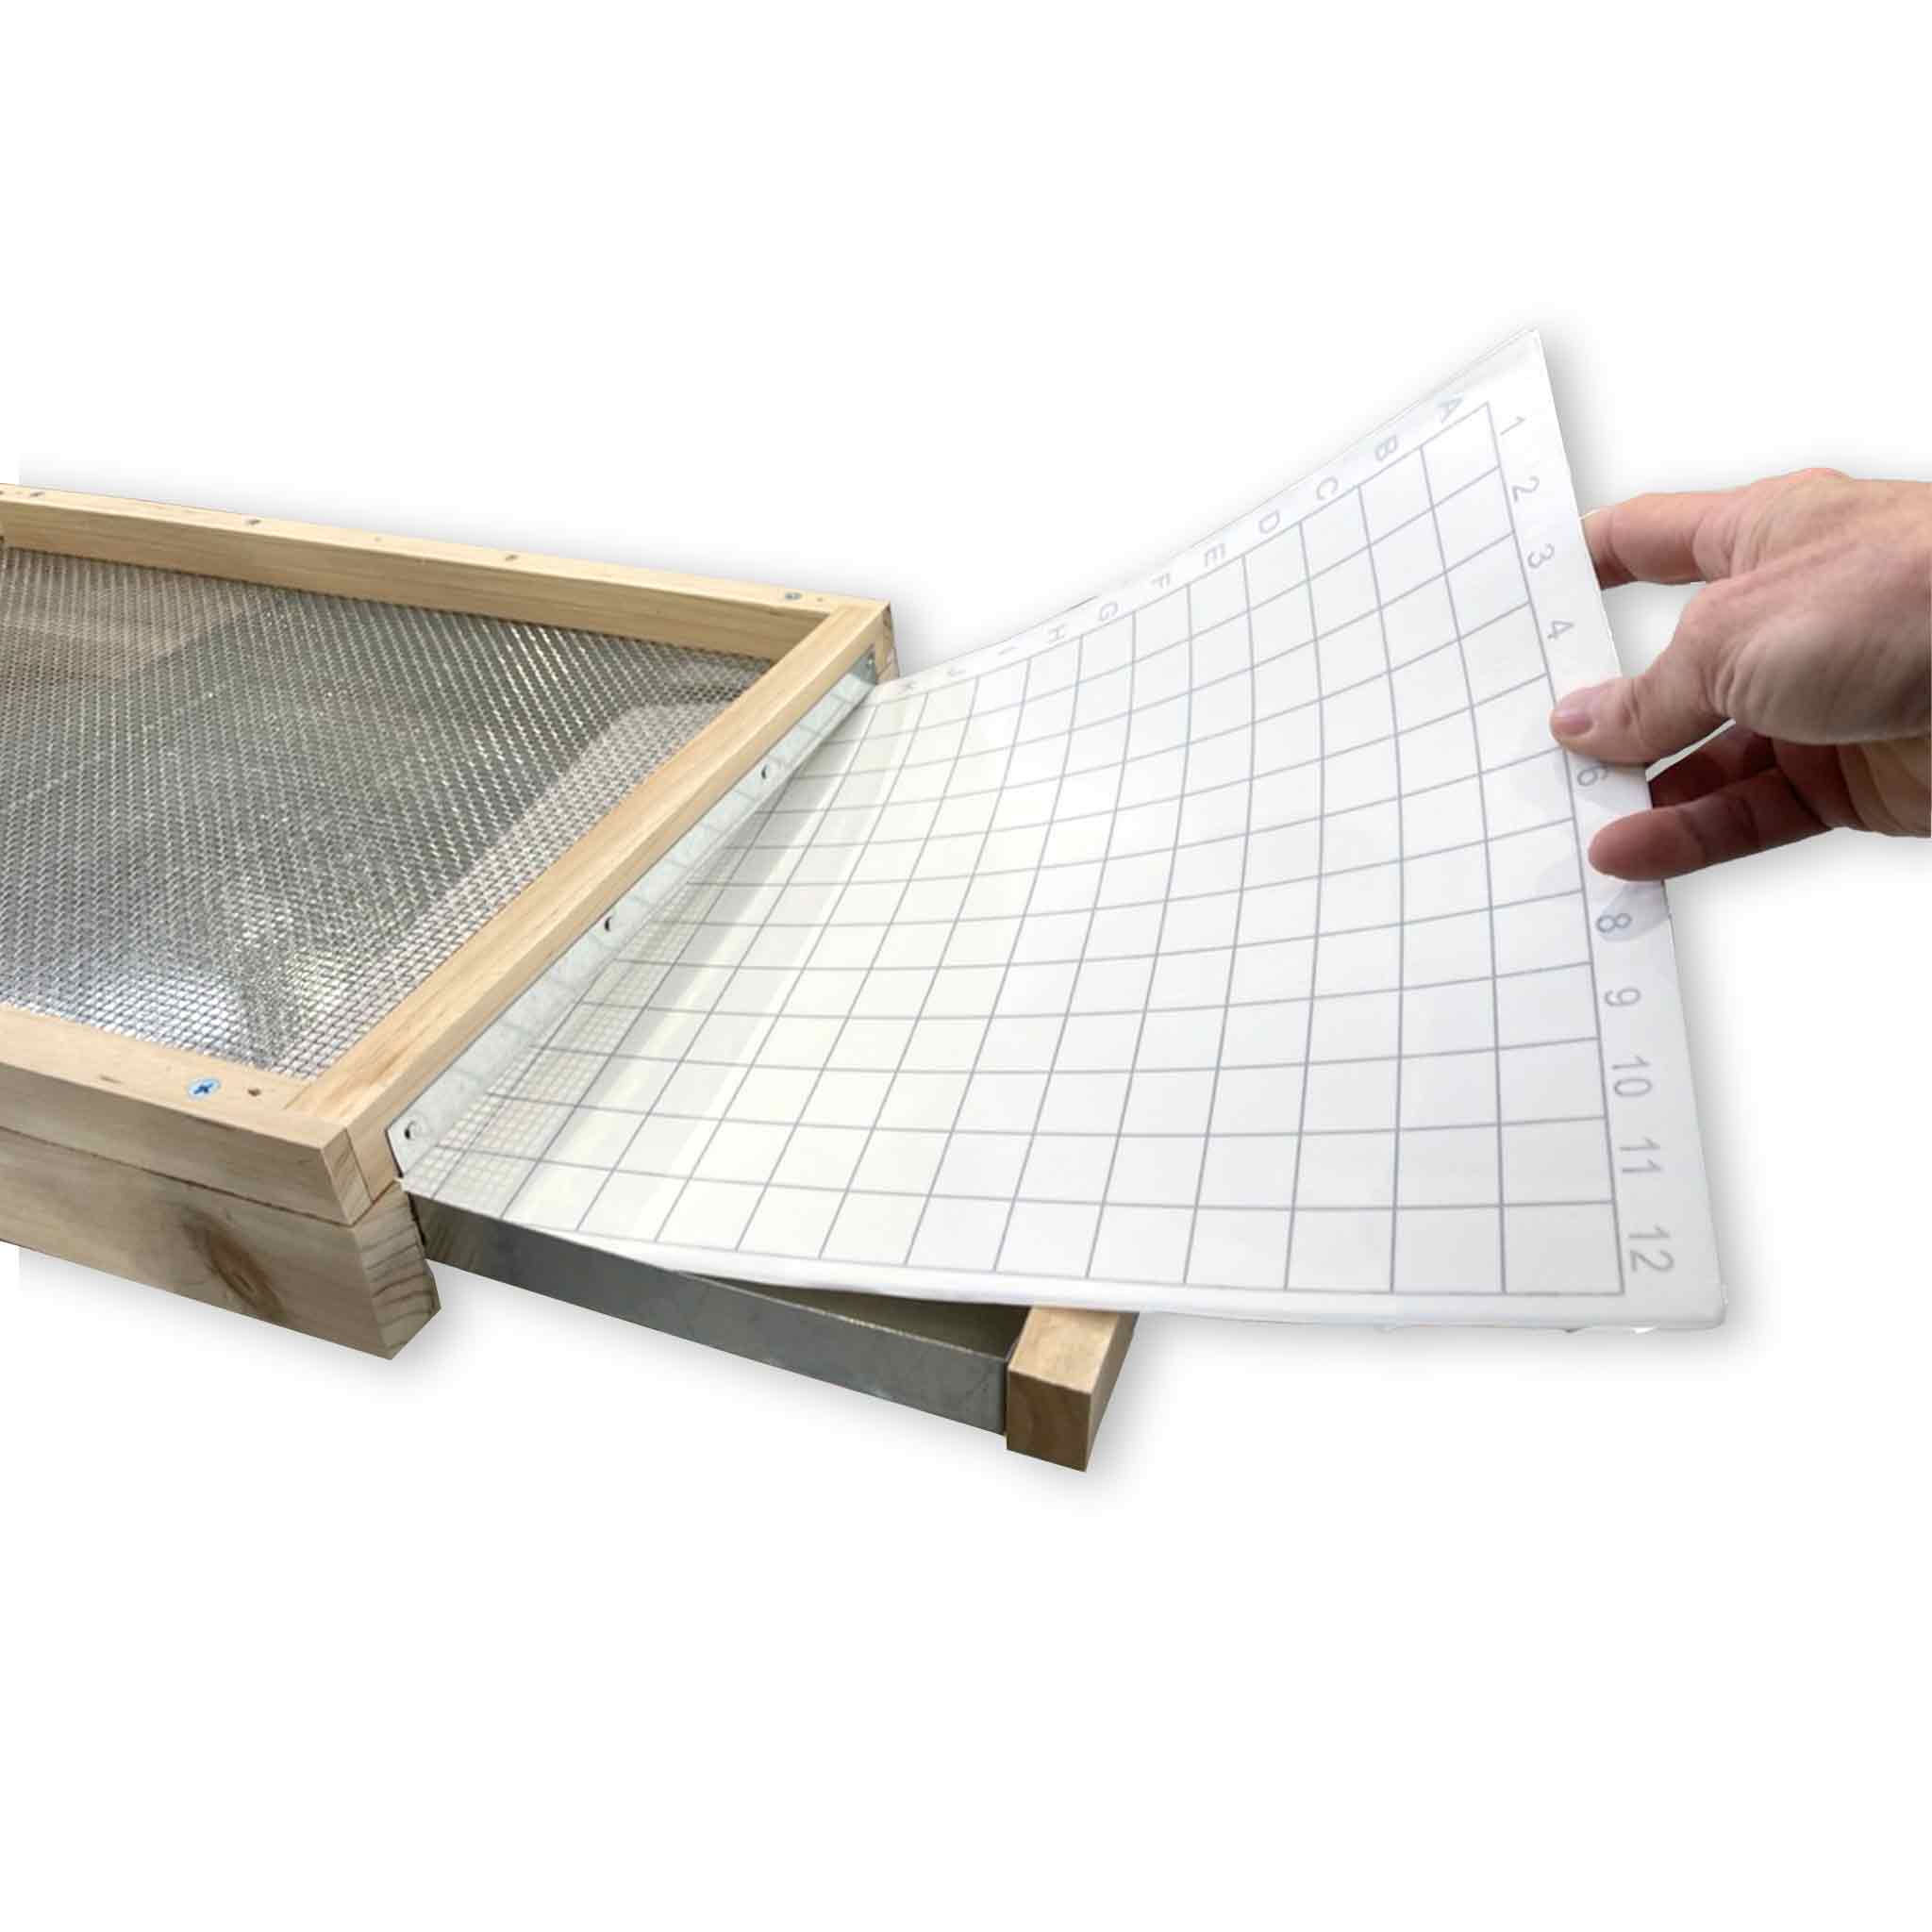 Varroa Mite Sticky Mat Board used with Ventilated Screened Bottom Board Floors (Pack 4) - Health collection by Buzzbee Beekeeping Supplies